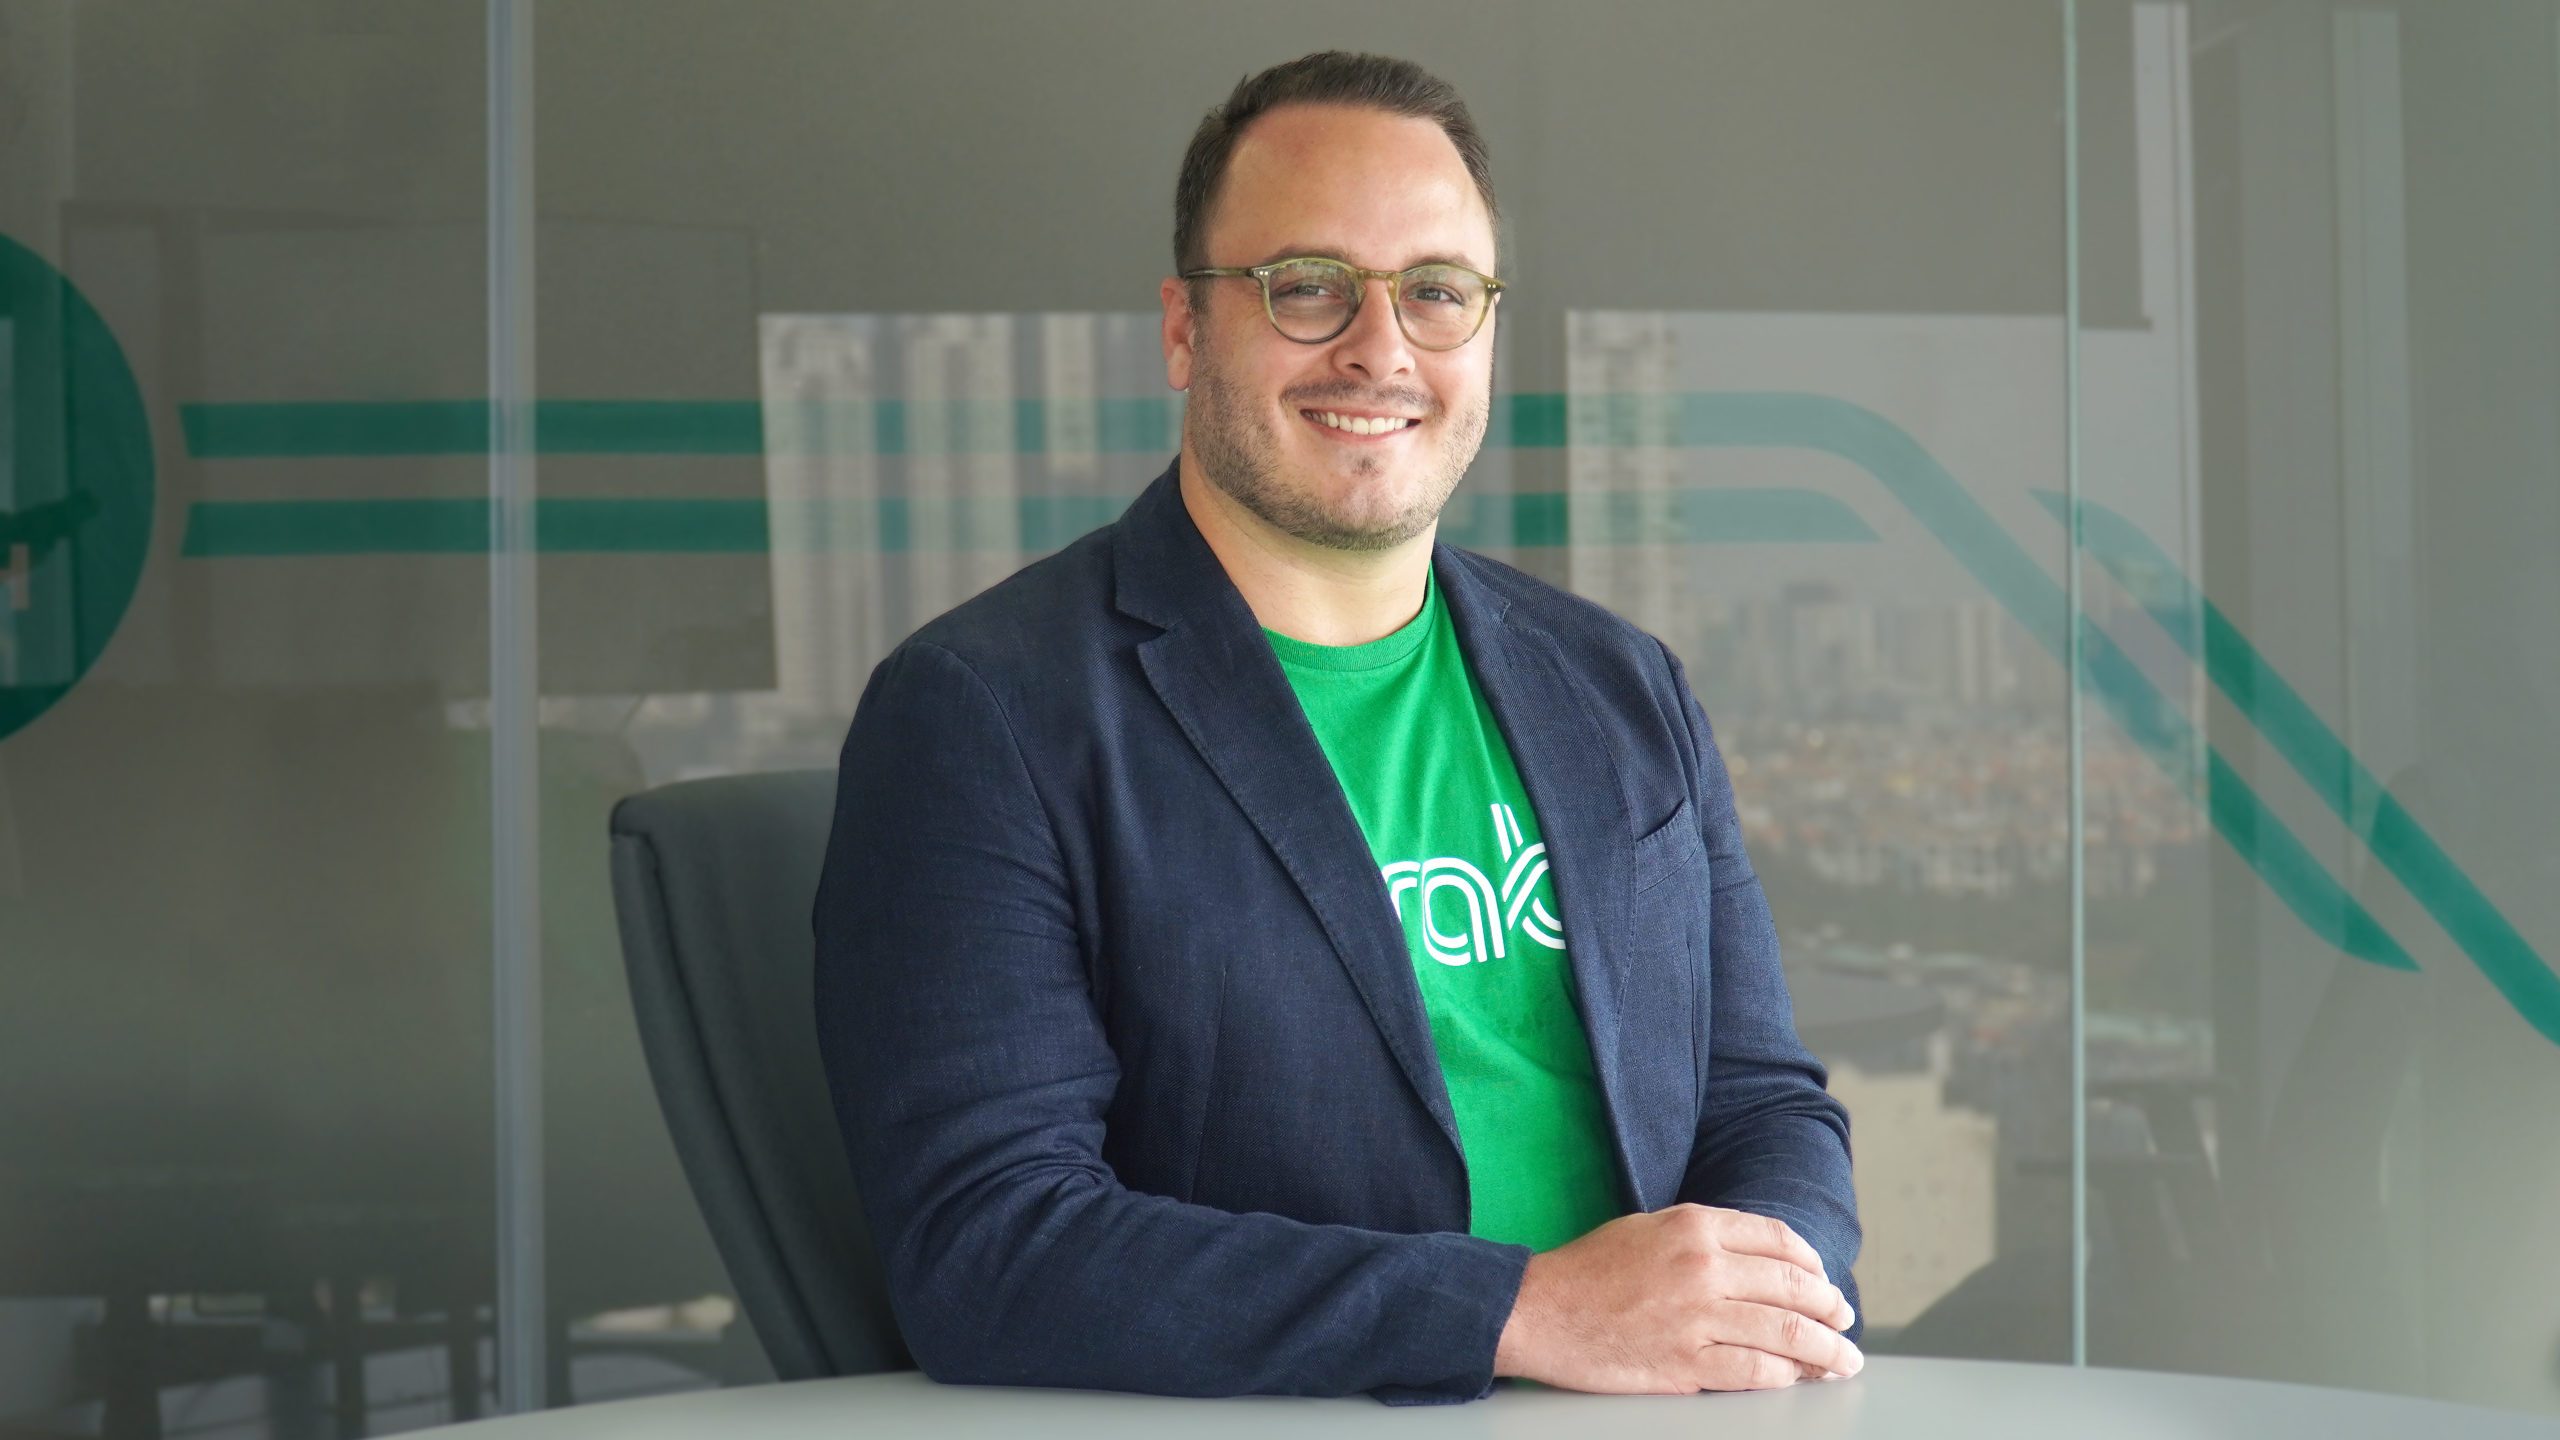 Grab appoints Alejandro Osorio as new country head for Vietnam